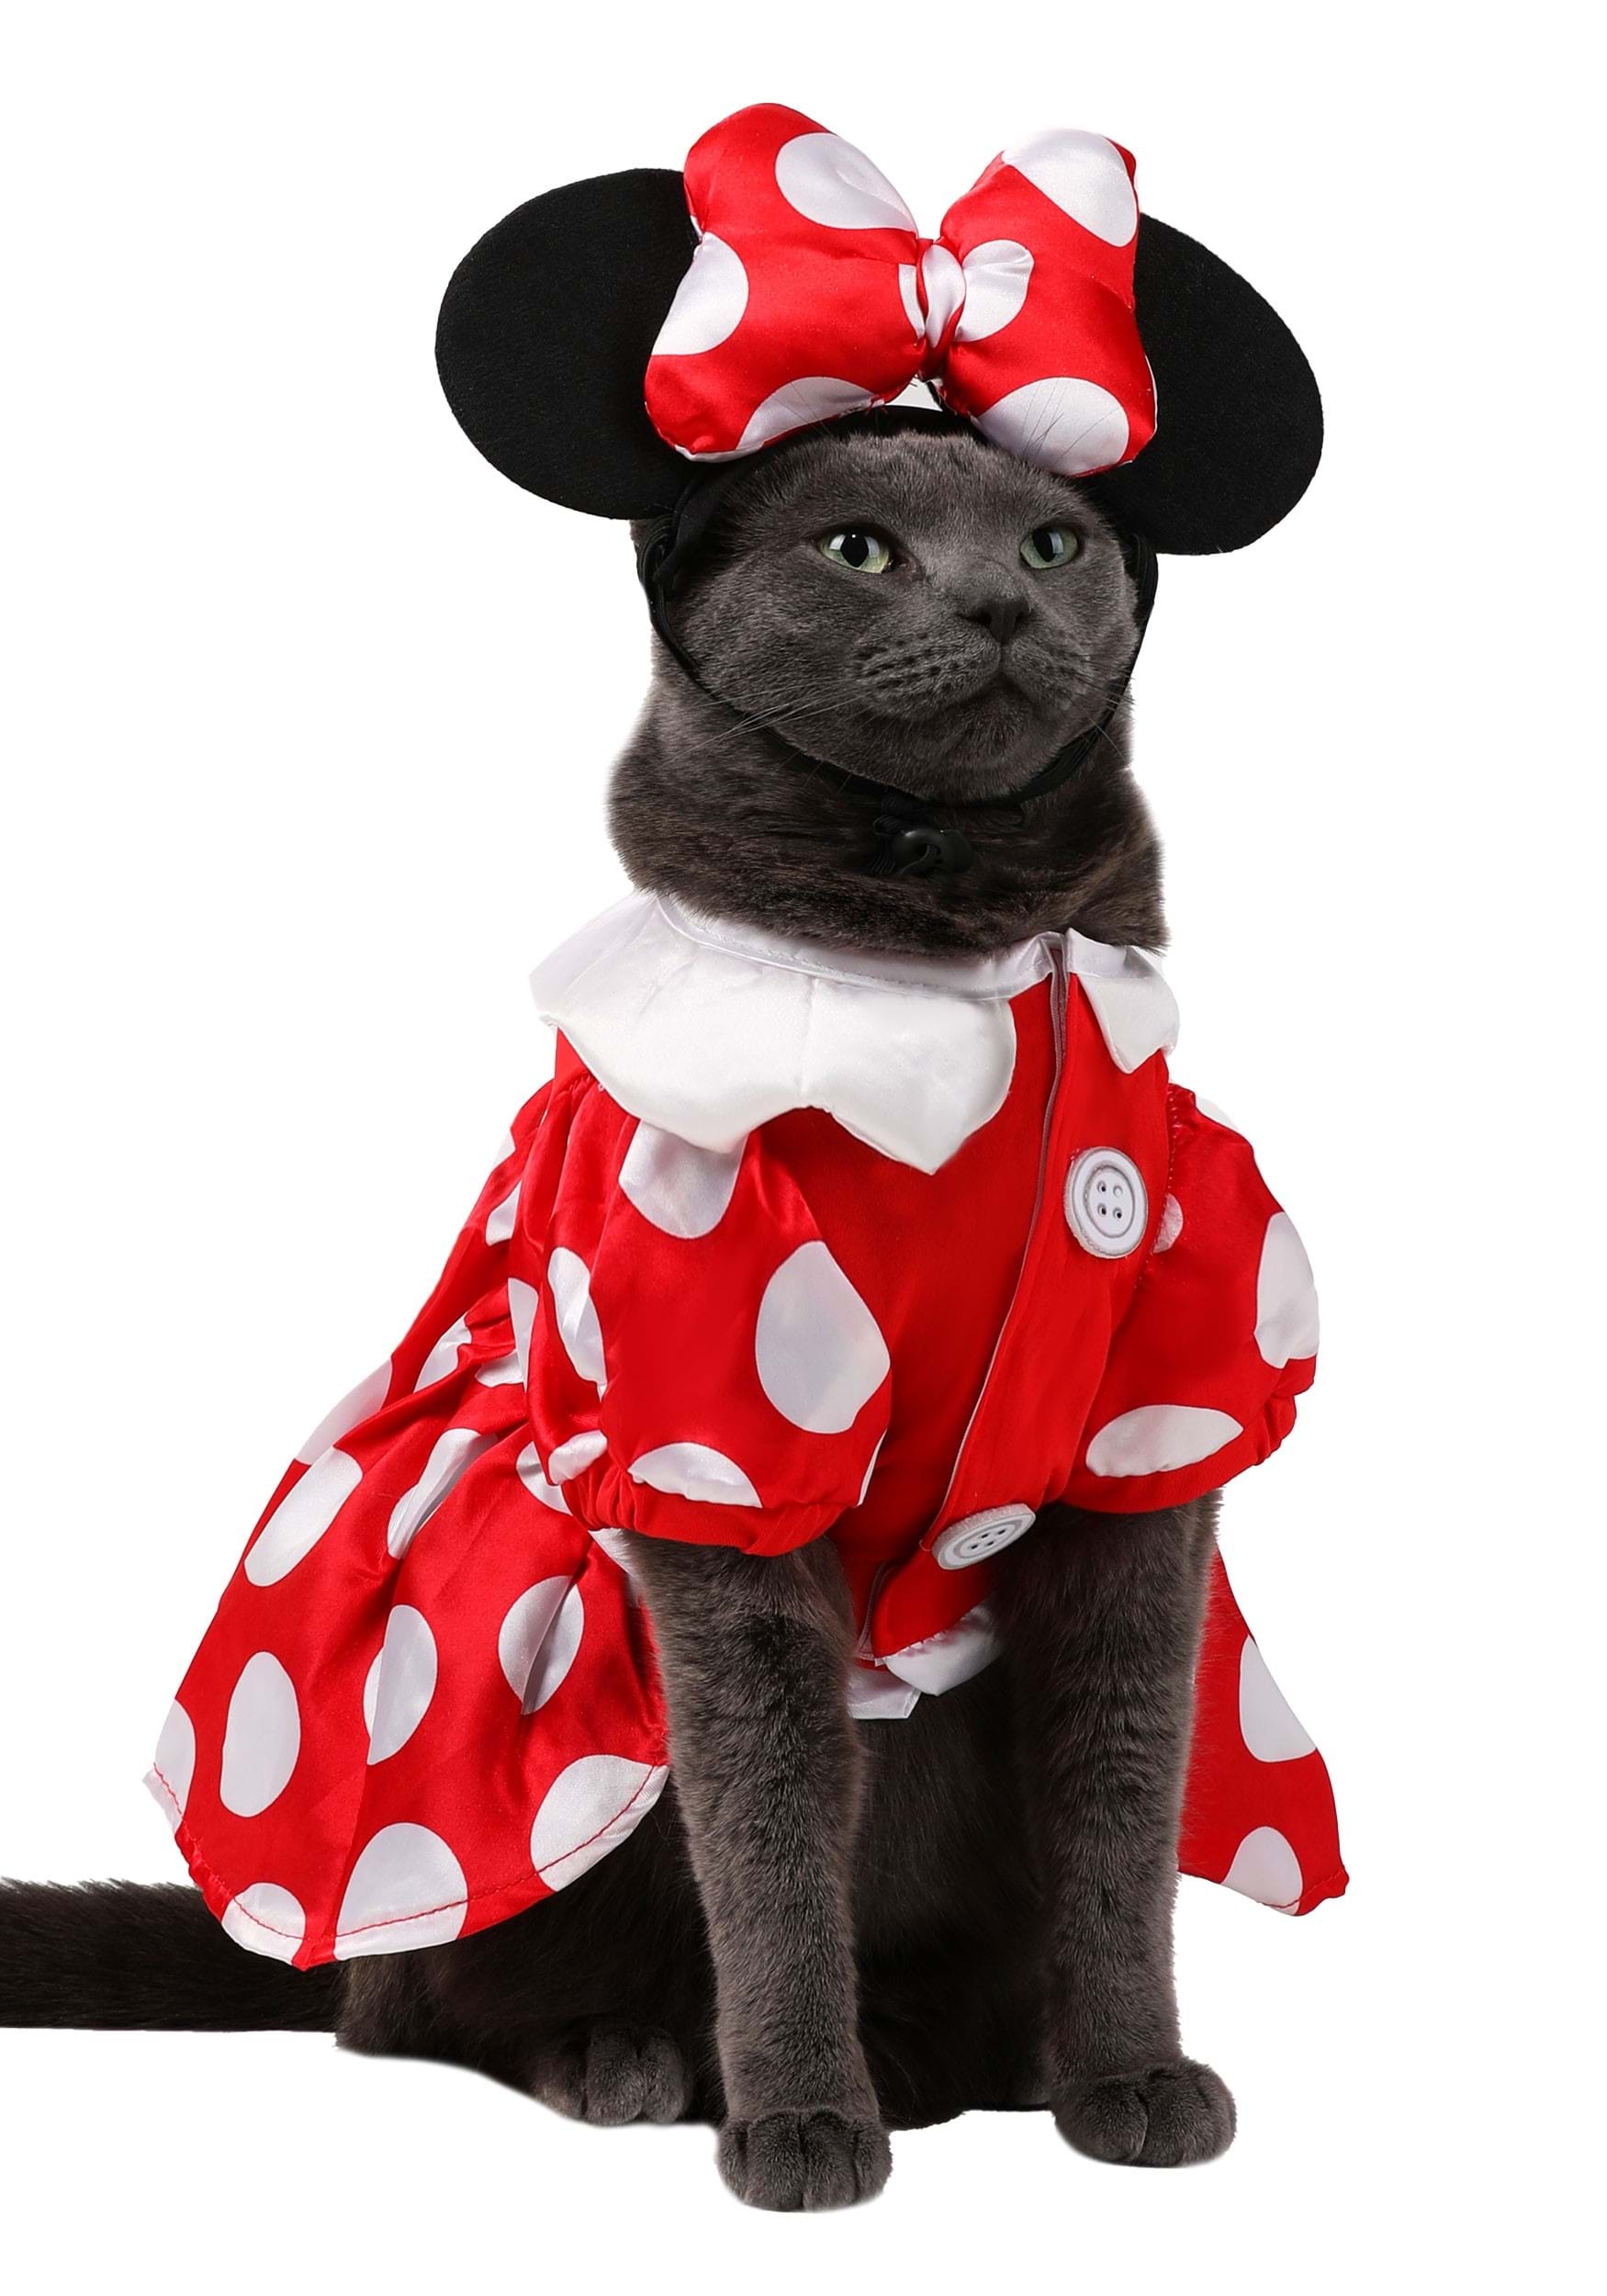 Disney Minnie Mouse Fancy Dress Costume For Dogs